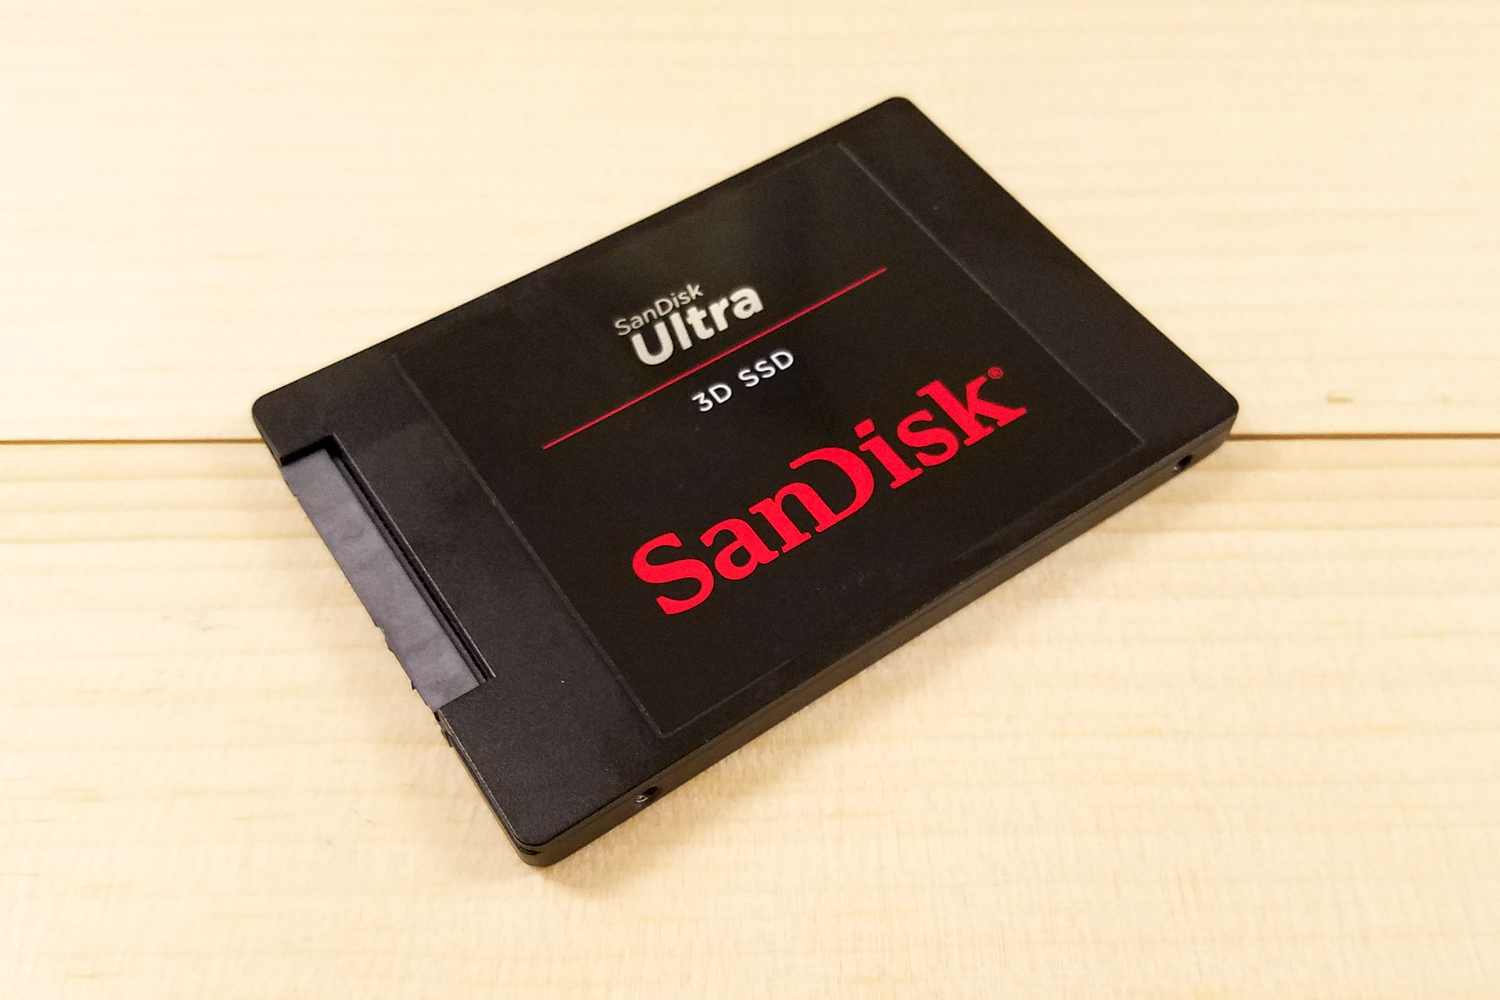 SanDisk Ultra 3D SSD sitting flat on a table angled at 45 degrees